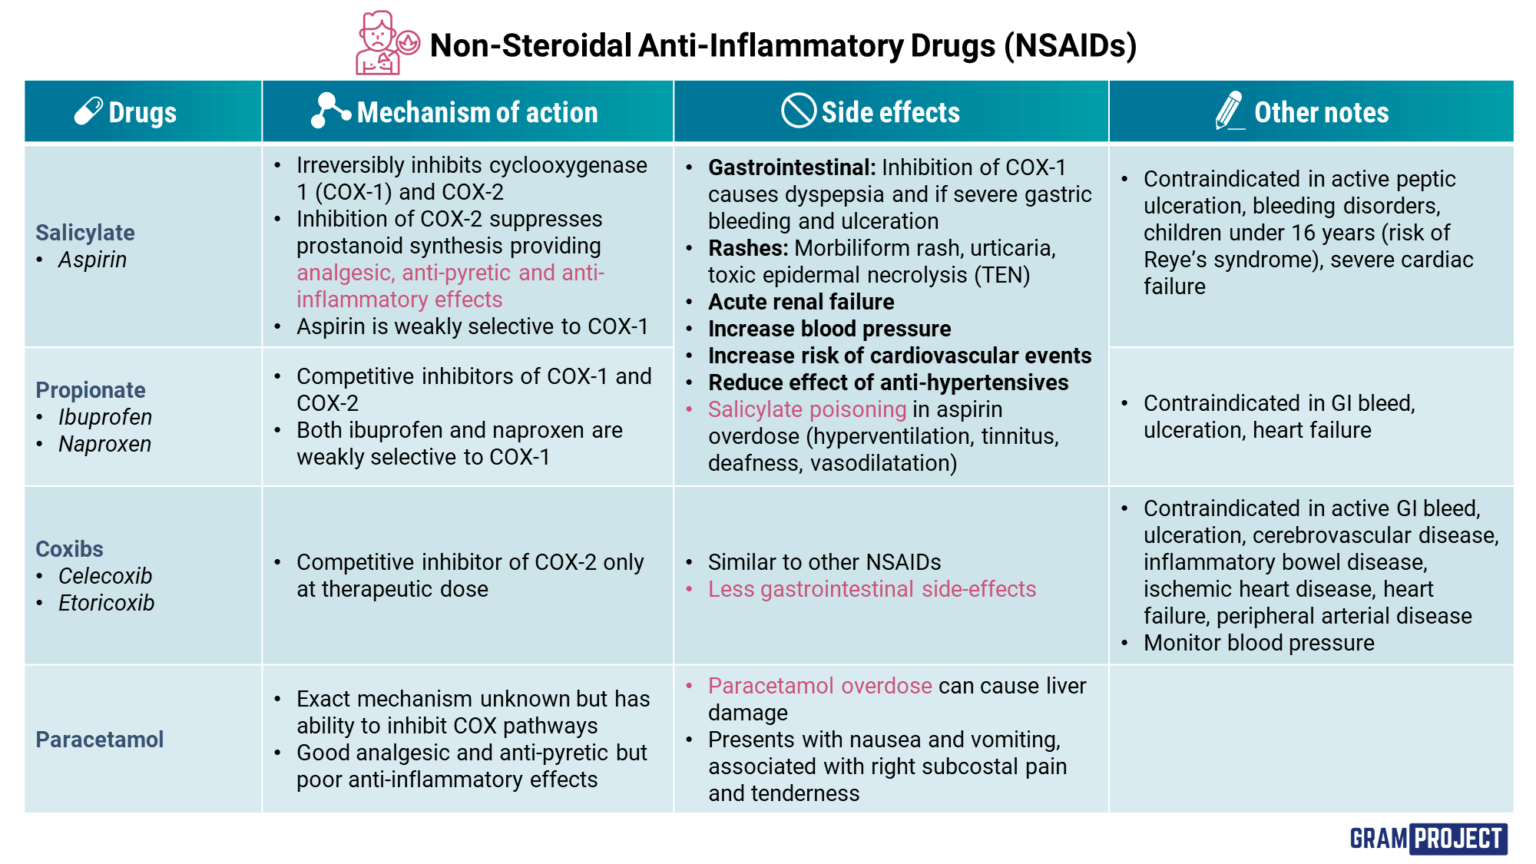 Summary table of commonly used non-steroidal anti-inflammatory drugs